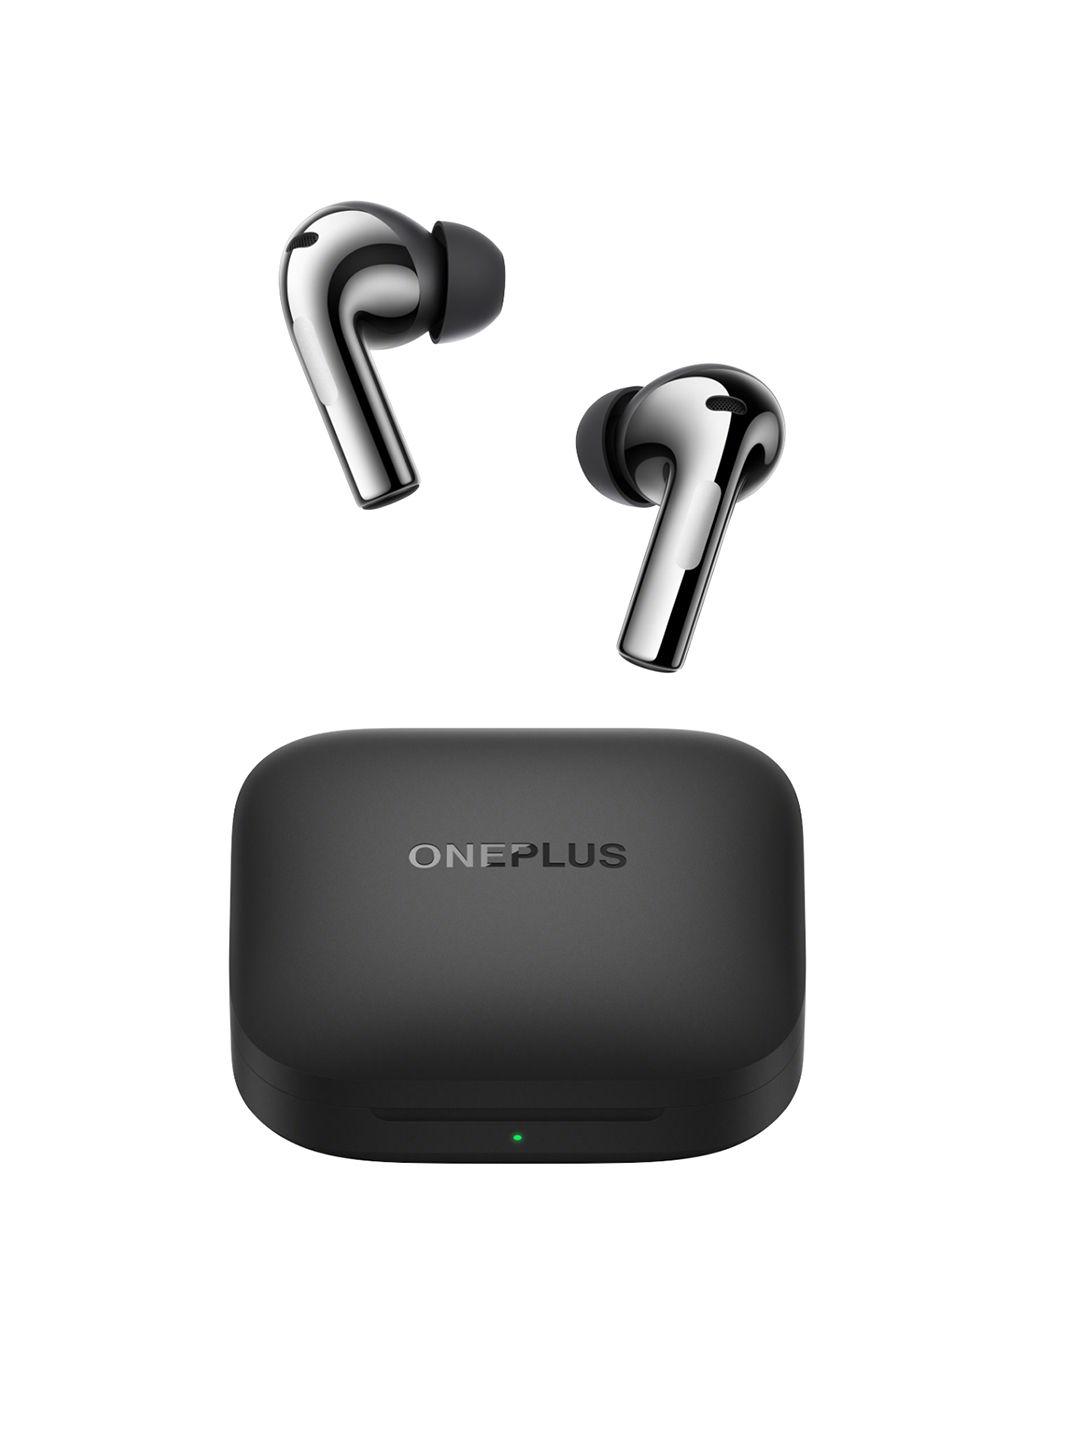 oneplus-buds-3-true-wireless-in-ear-earbuds-with-sliding-volume-control-and-49db-anc